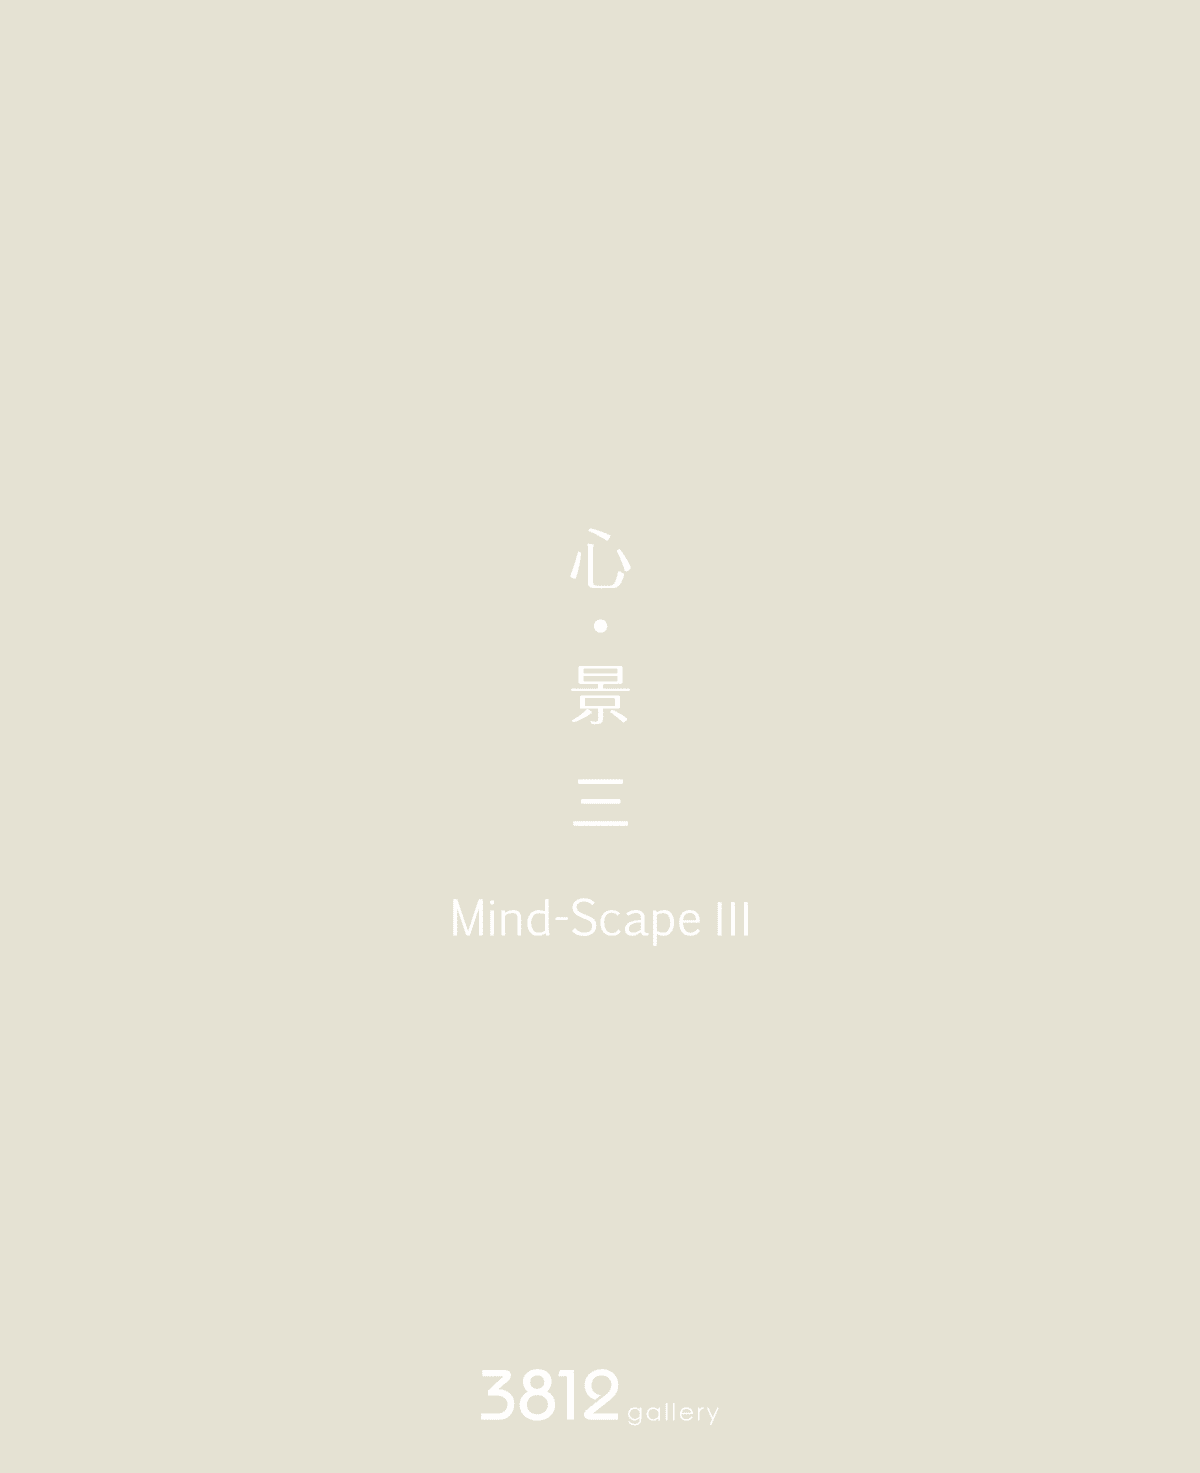 Mind-scape III